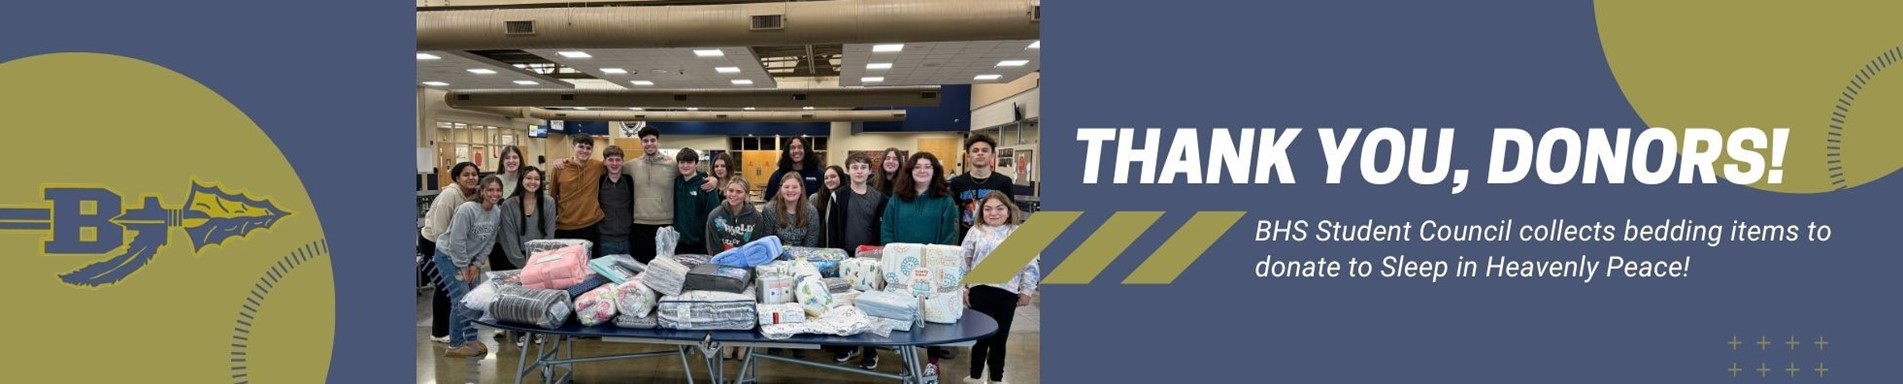 BHS student council collects bedding for Sleep in Heavenly Peace